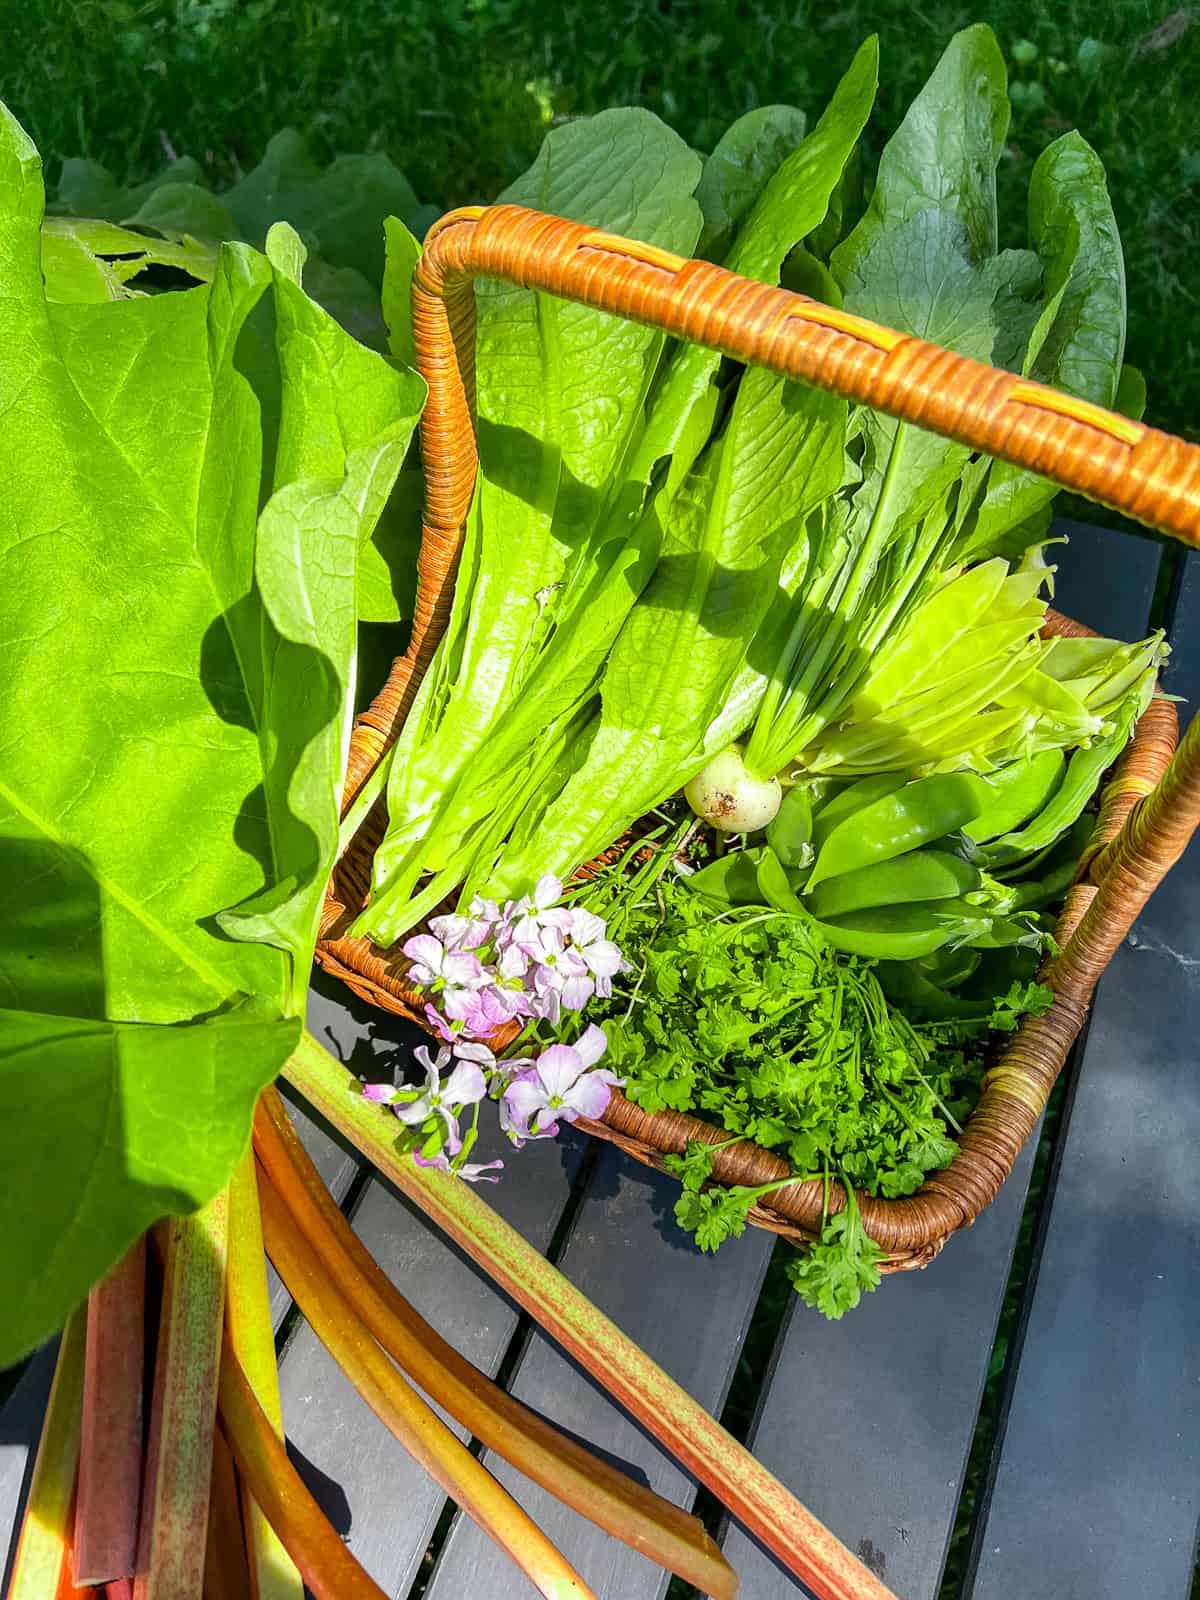 A basket of homegrown produce including romaine lettuce leaves.